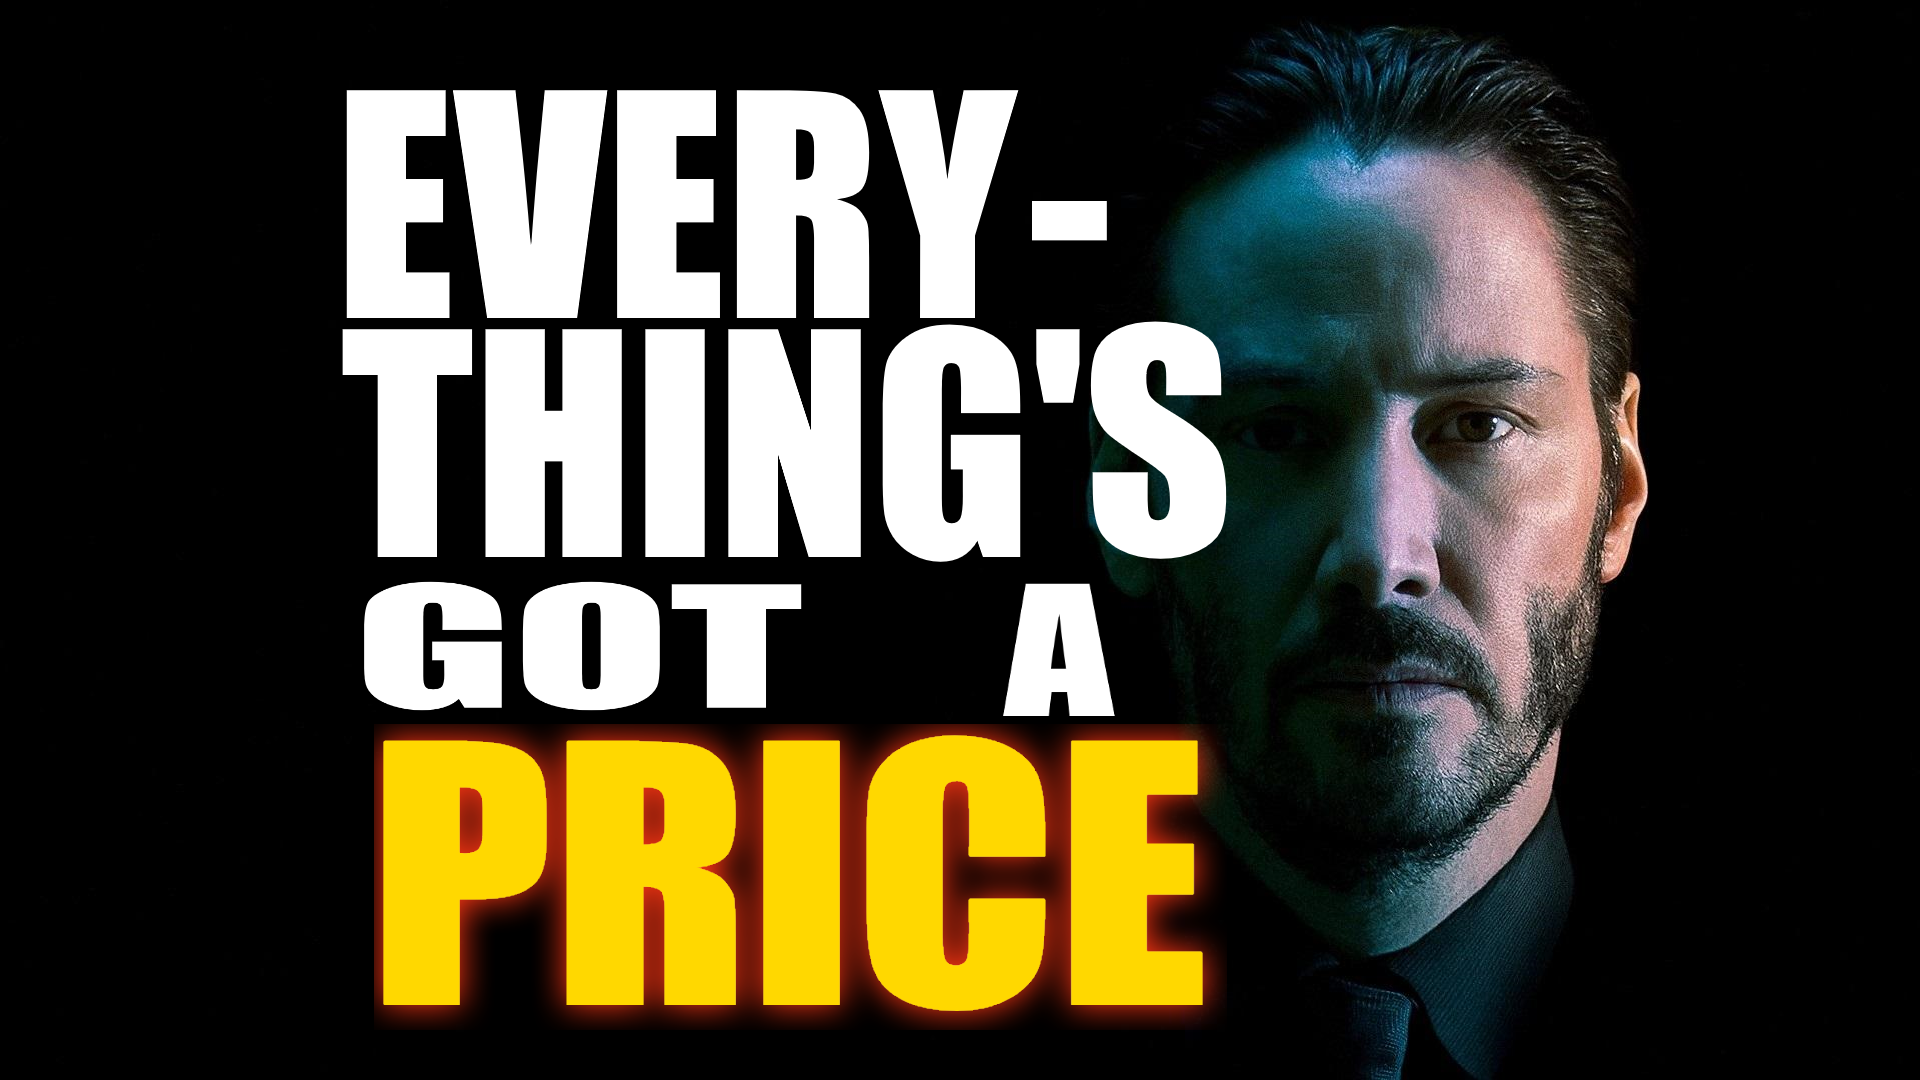 John Wick Movie Characters Keanu Reeves Quote Simple Text Face Movies Neo Frontal View Typography 1920x1080